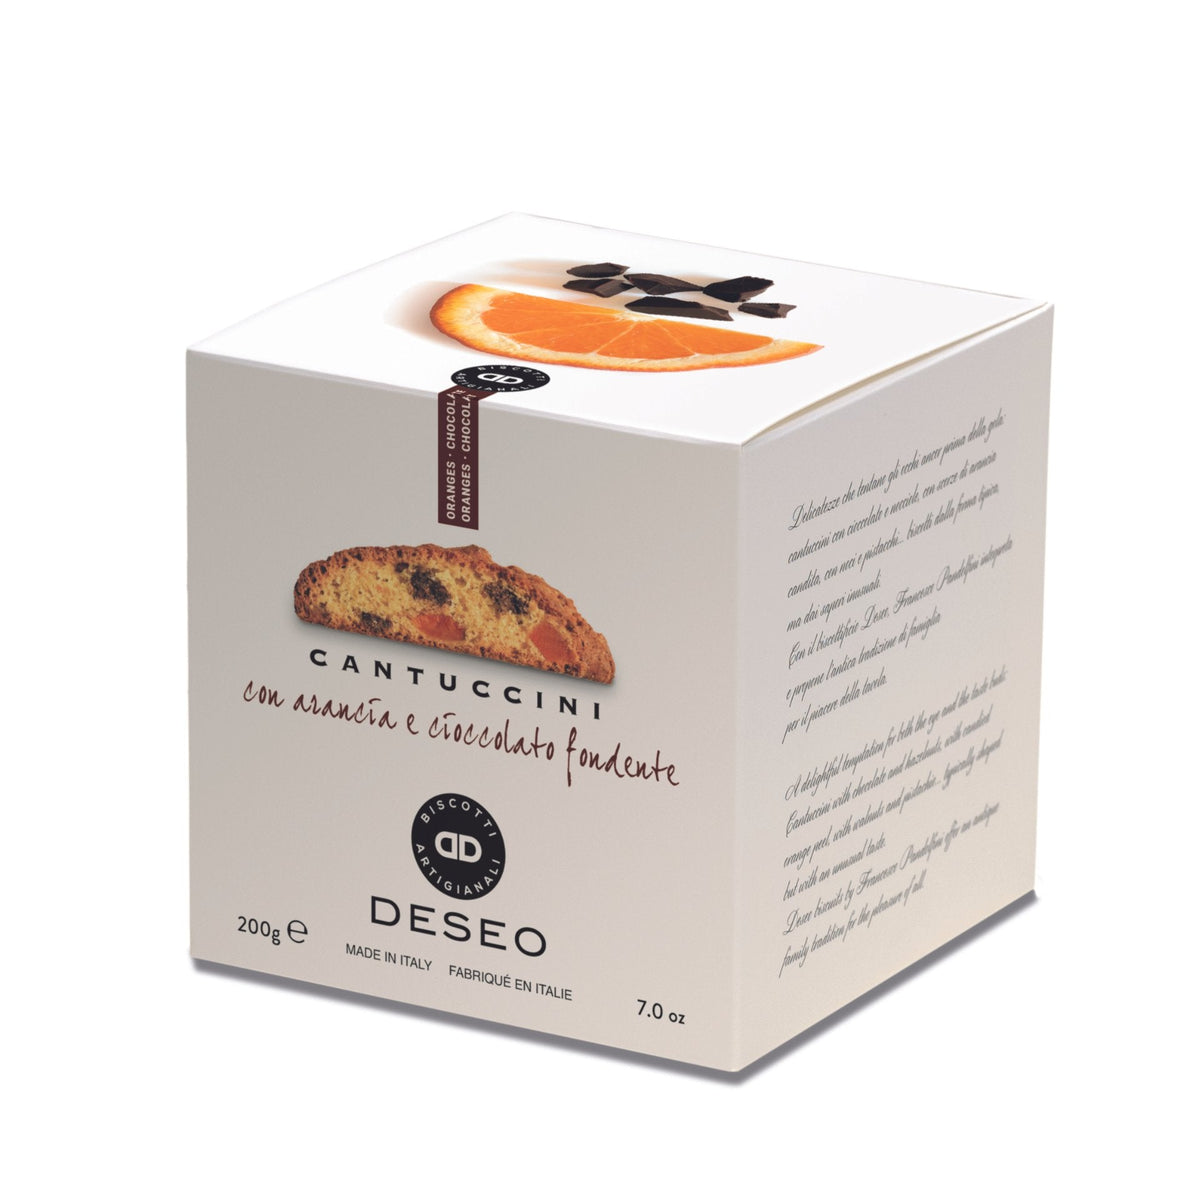 Deseo Cantuccini Toscani with Candied Orange &amp; Dark Chocolate 200g (Box)  | Imported and distributed in the UK by Just Gourmet Foods